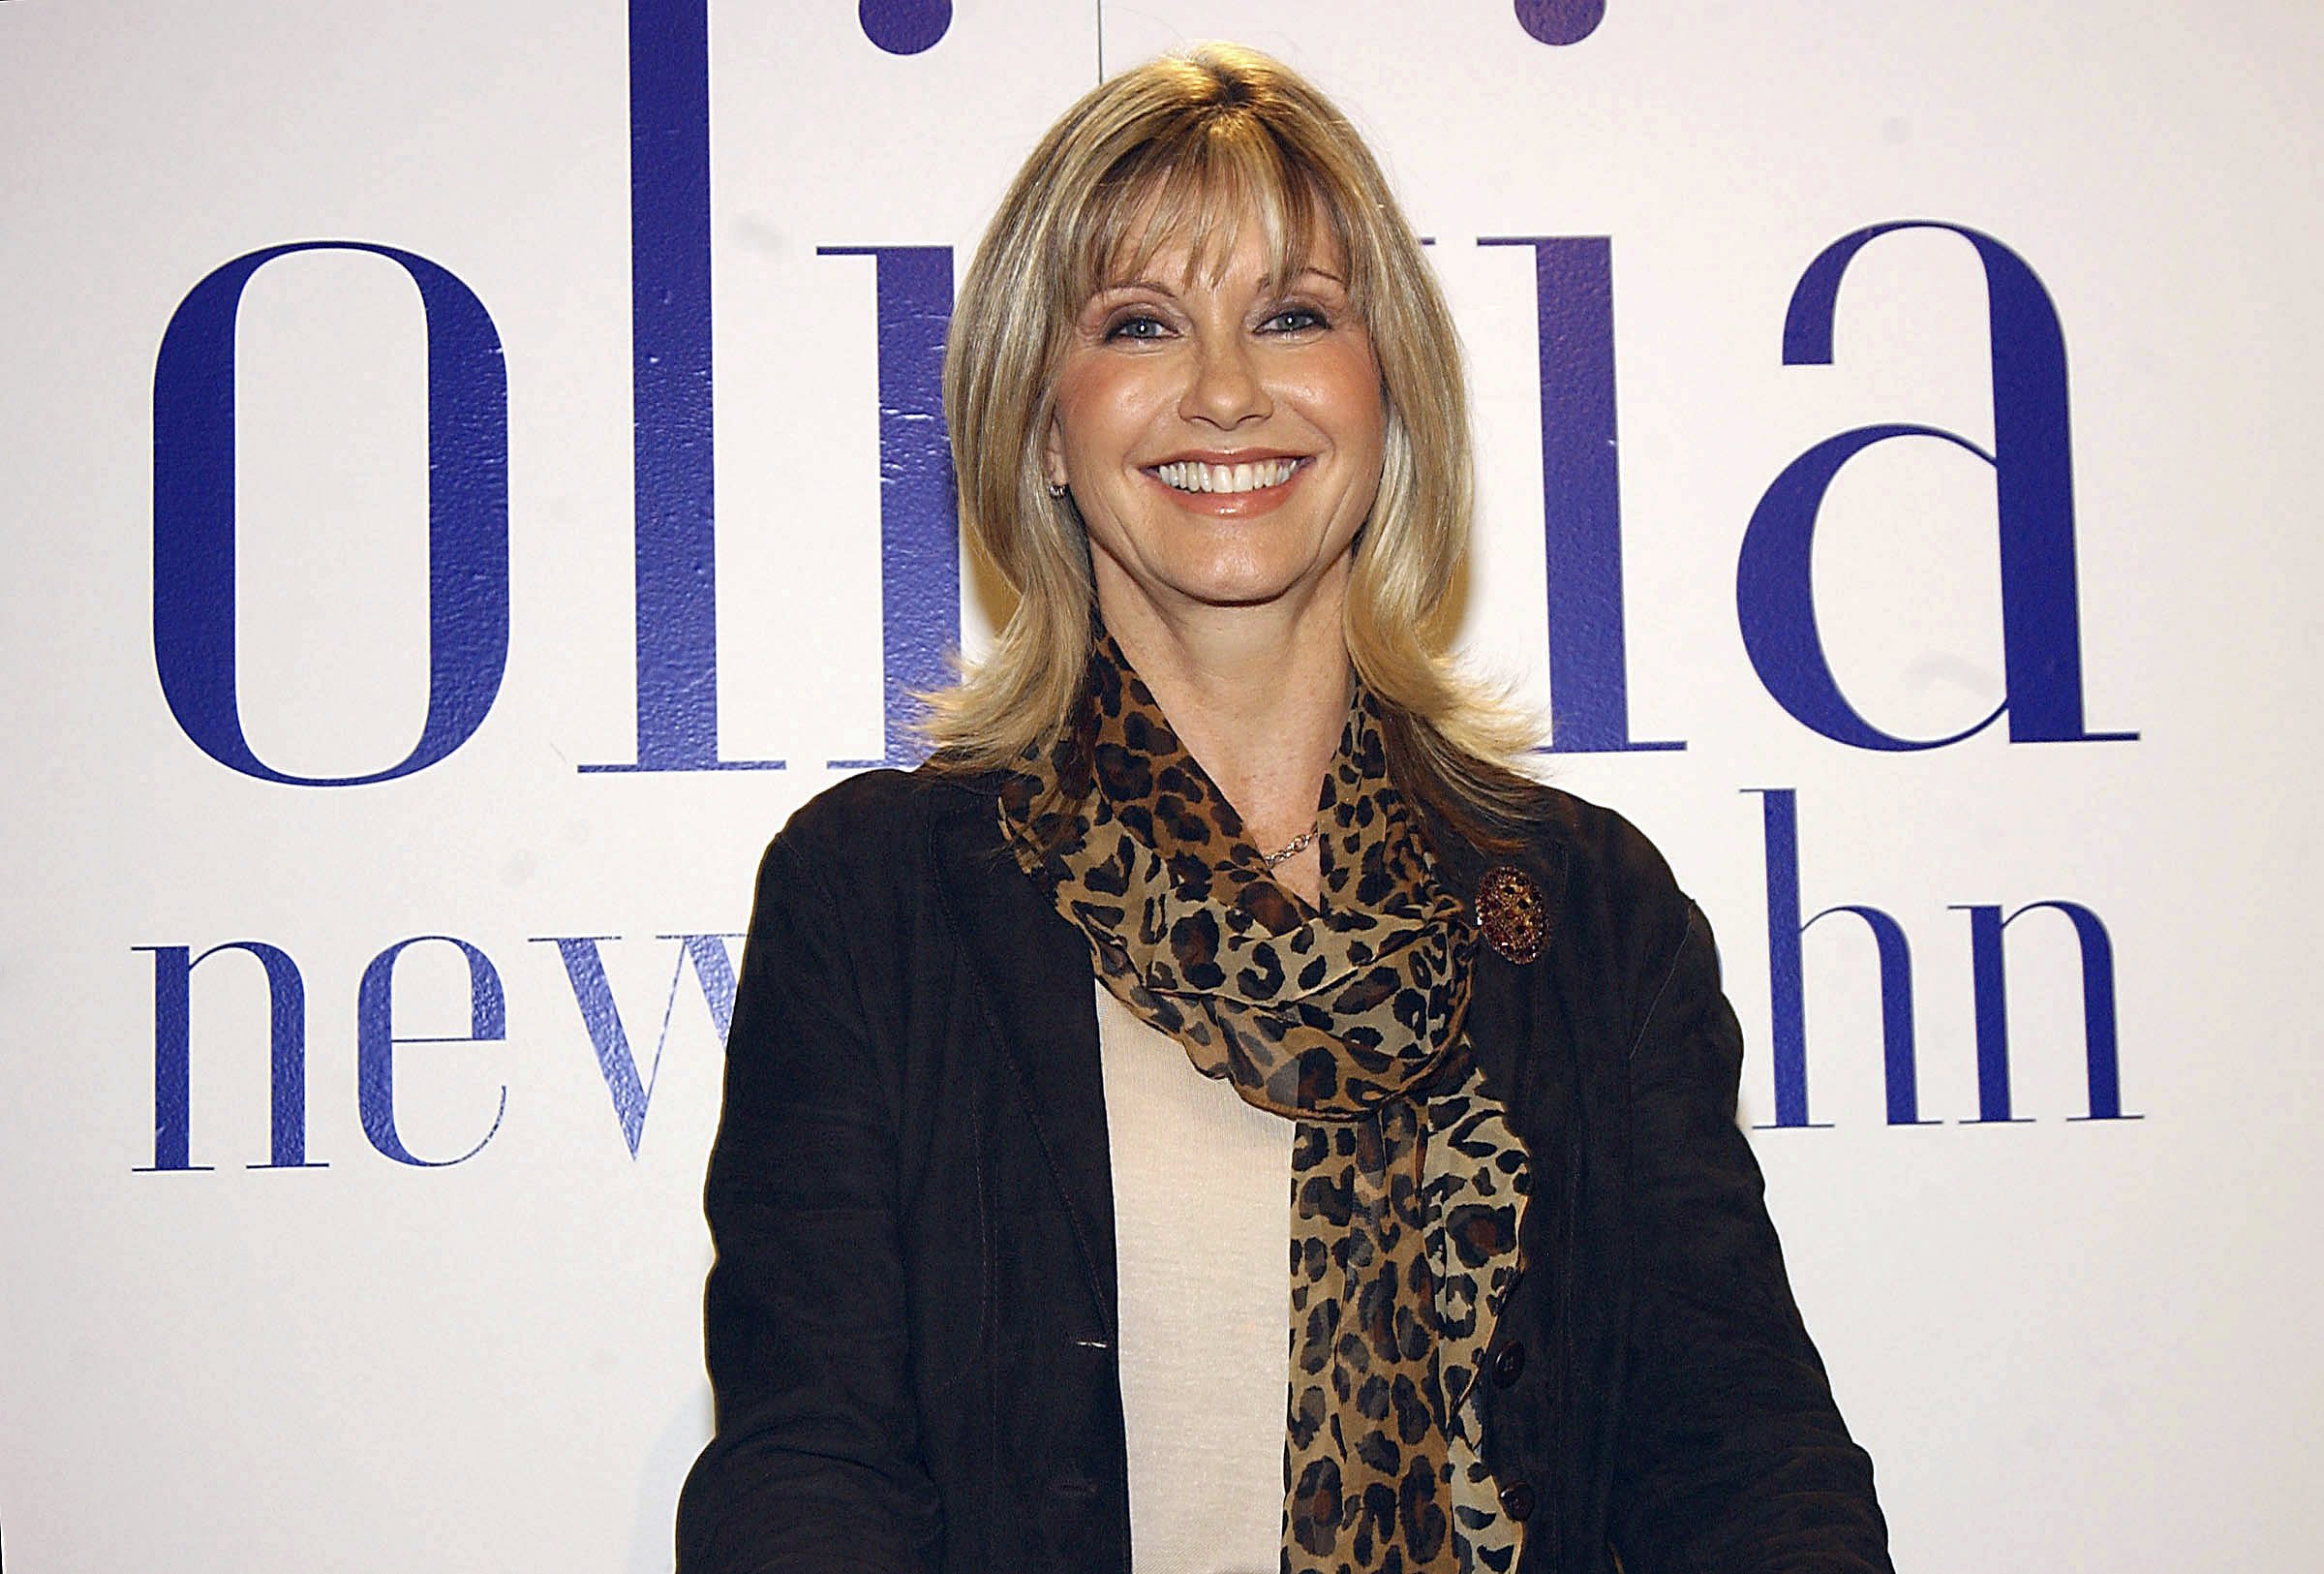 Olivia Newton-John promotes her new album "Indigo: Women Of Song" at the Myer city store on October 19, 2004, in Sydney, Australia. | Source: Getty Images